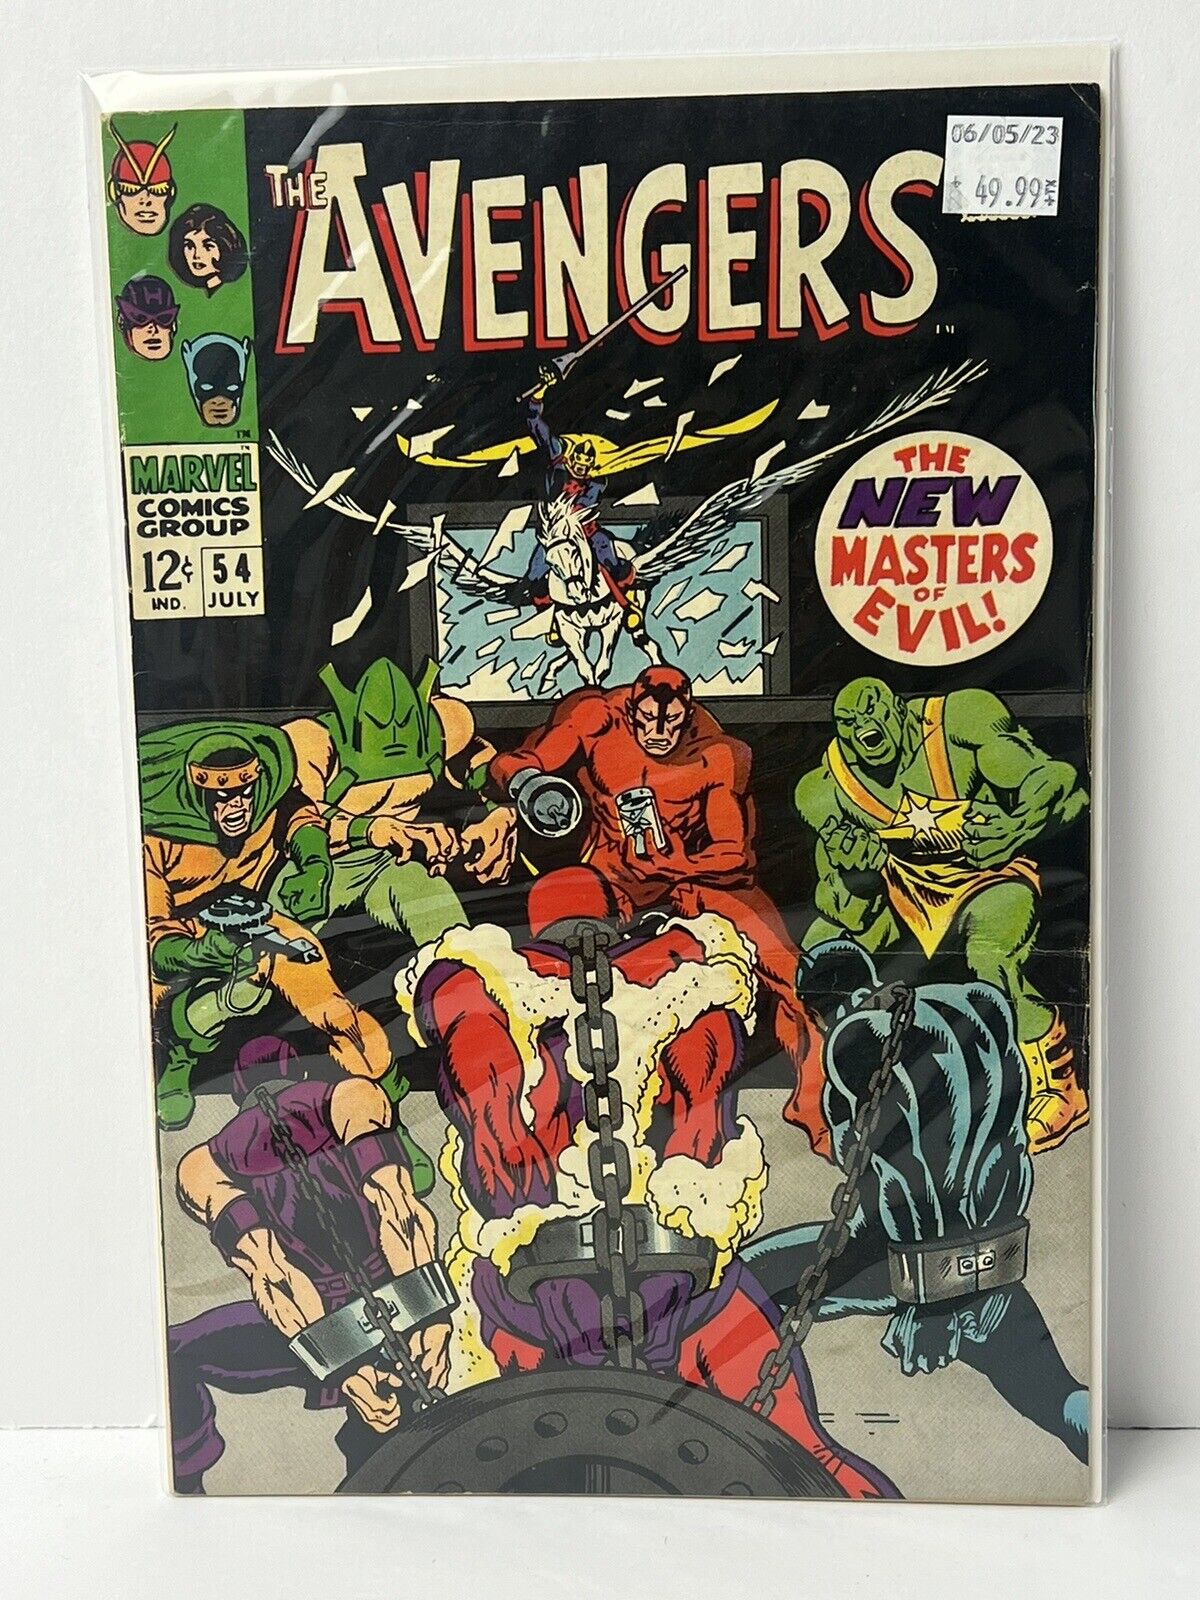 The Avengers #54 Marvel Comics 1968 Silver Age, Boarded